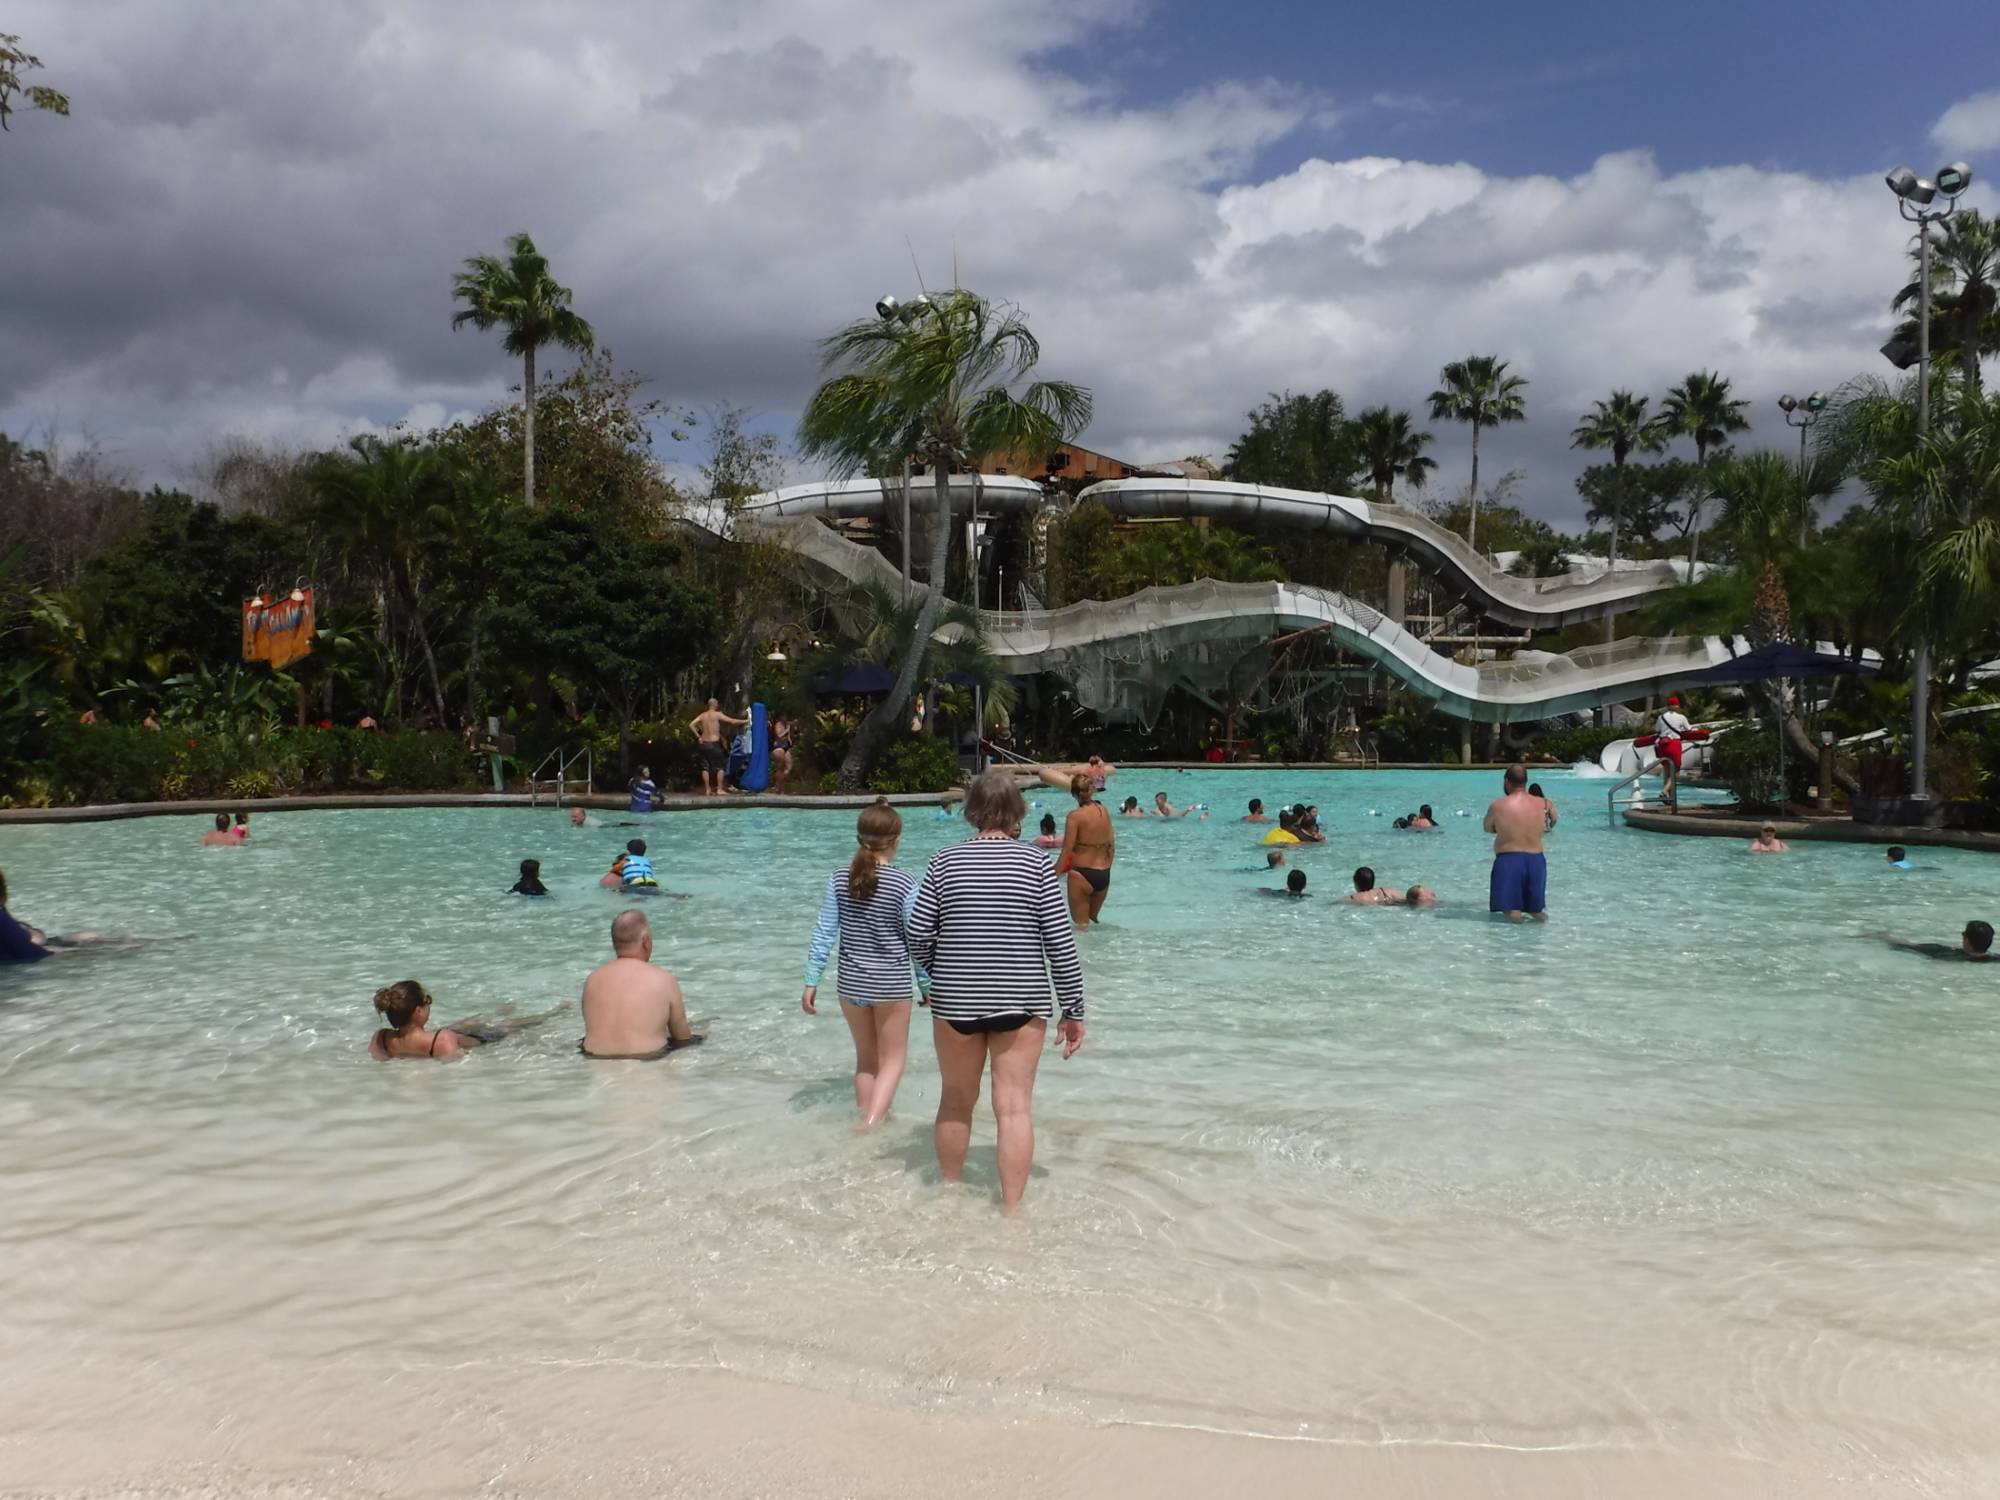 Which water park is right for your family - Typhoon Lagoon or Blizzard Beach? | PassPorter.com